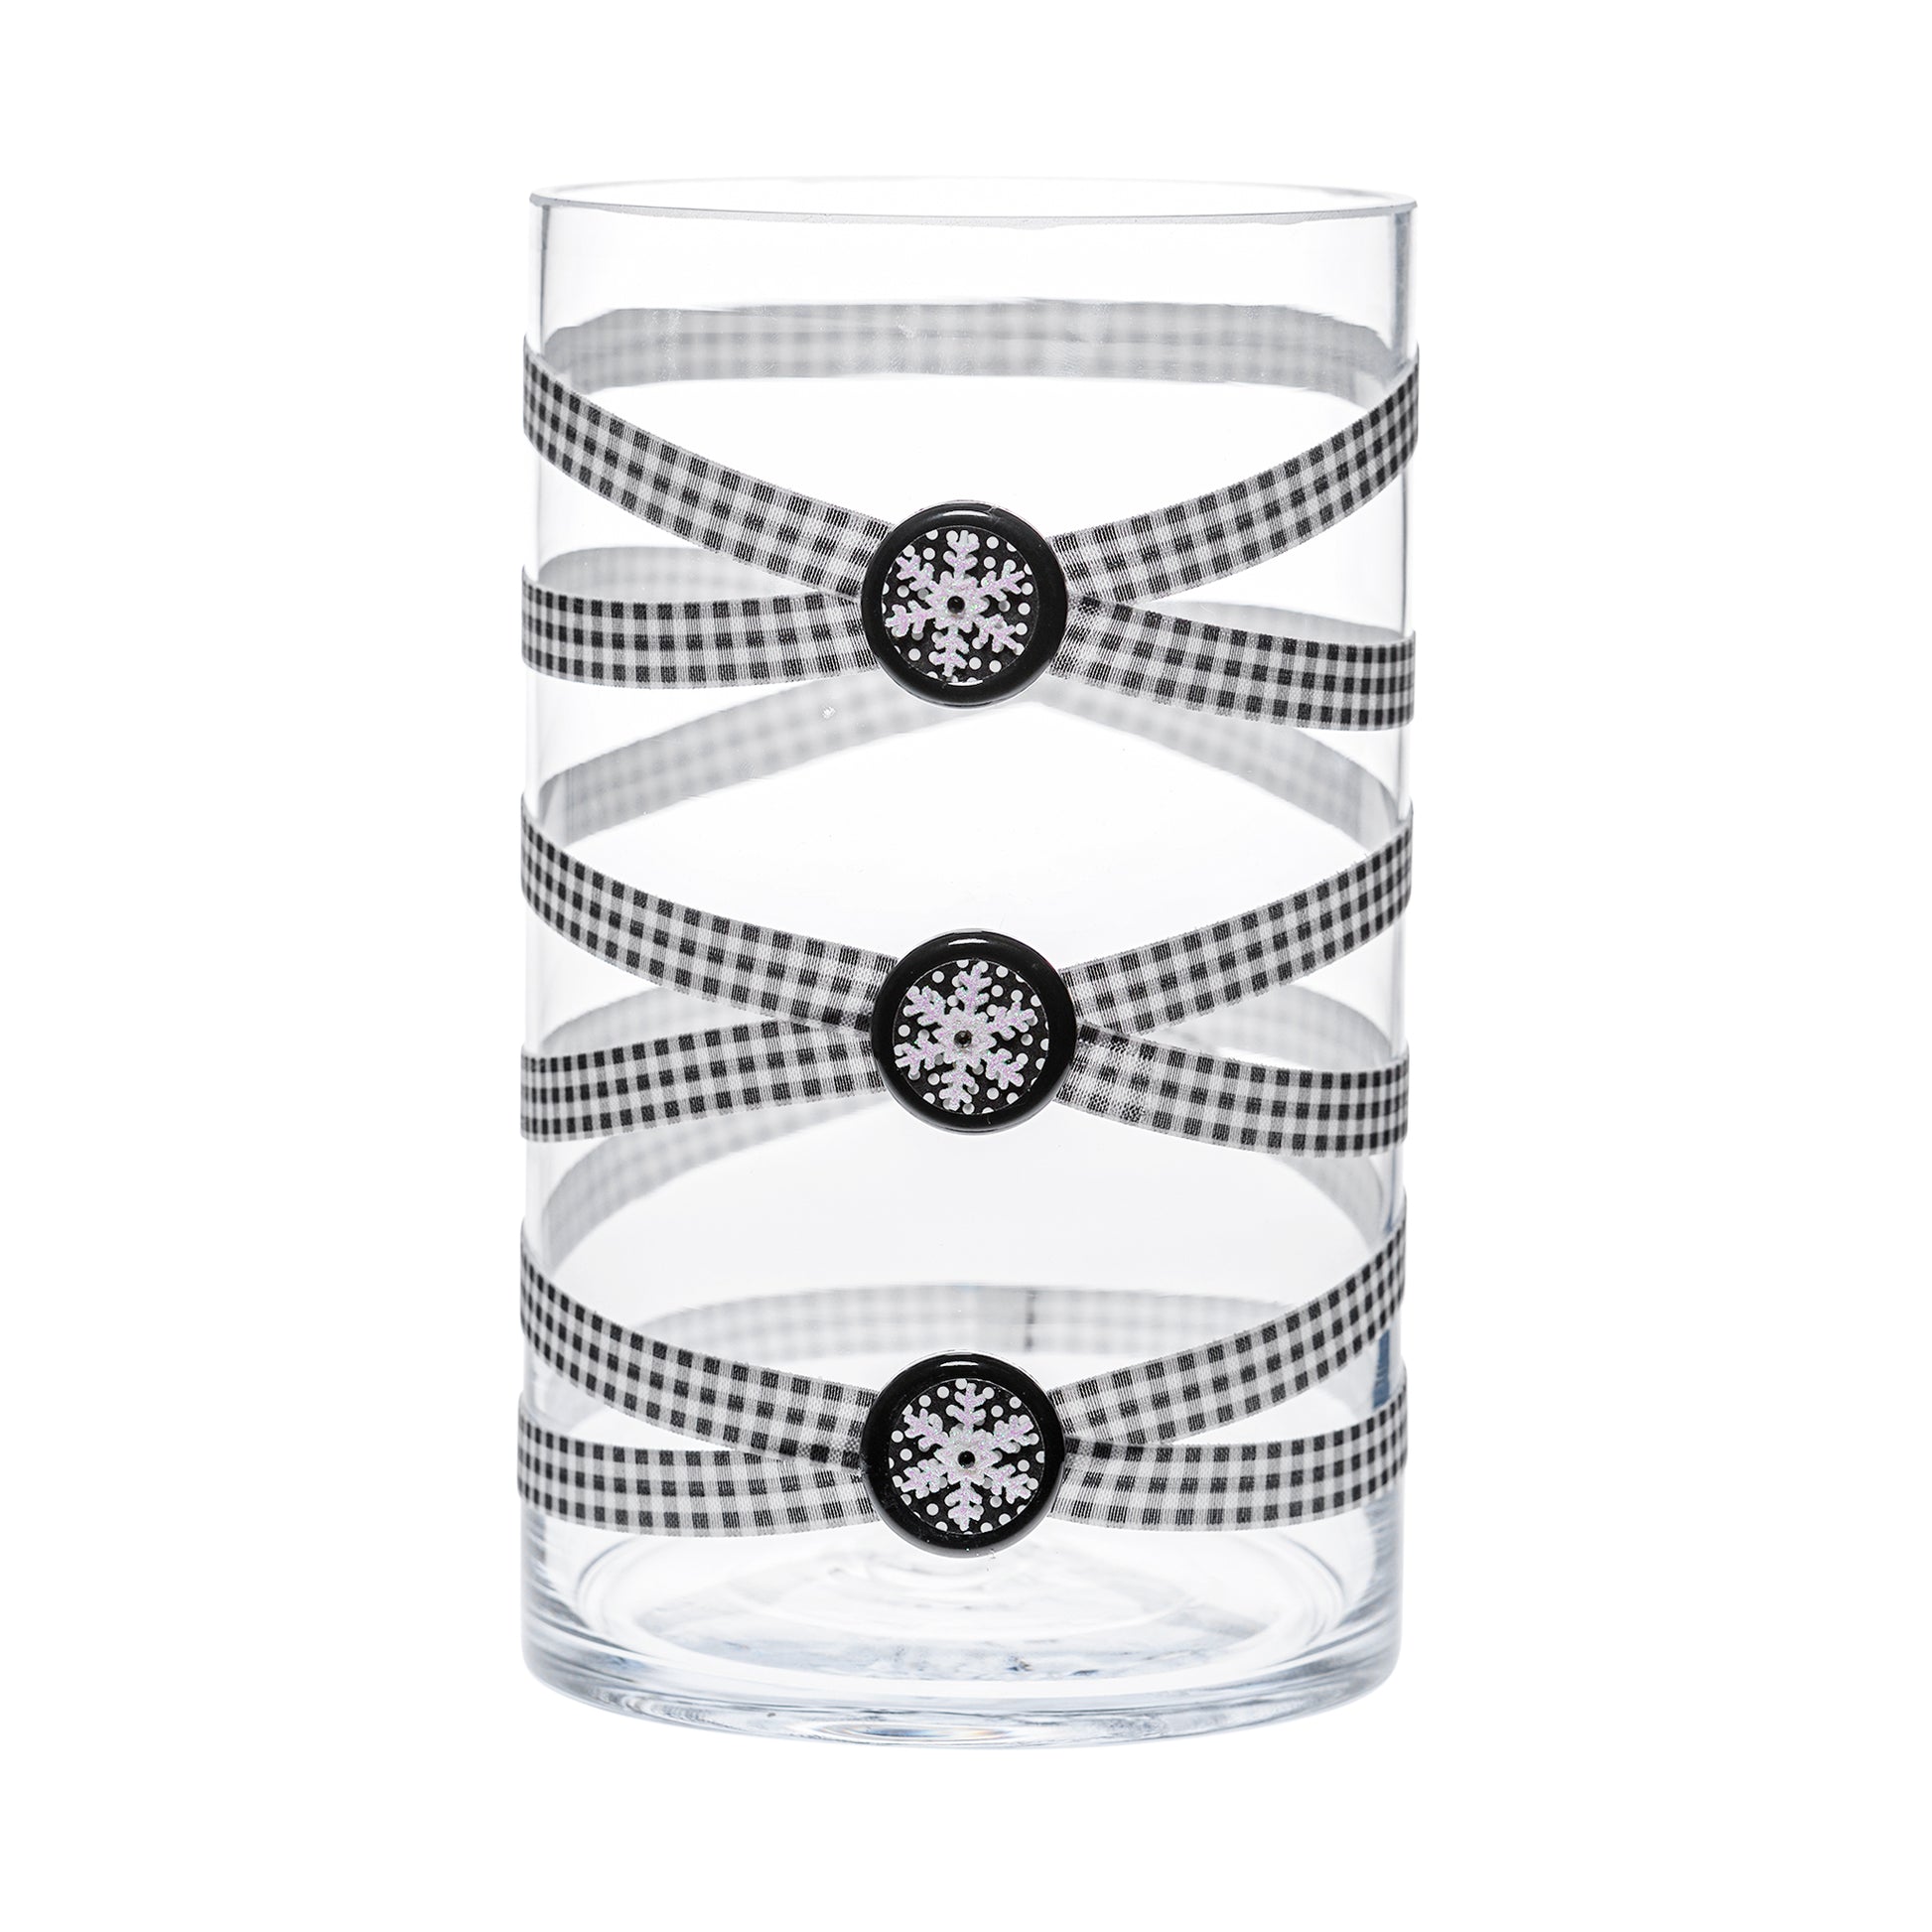 Front of Glass Wrappings 6" x 10" cylinder wrapped in black & white check elastic, decorated with 3 shiny snowflakes.